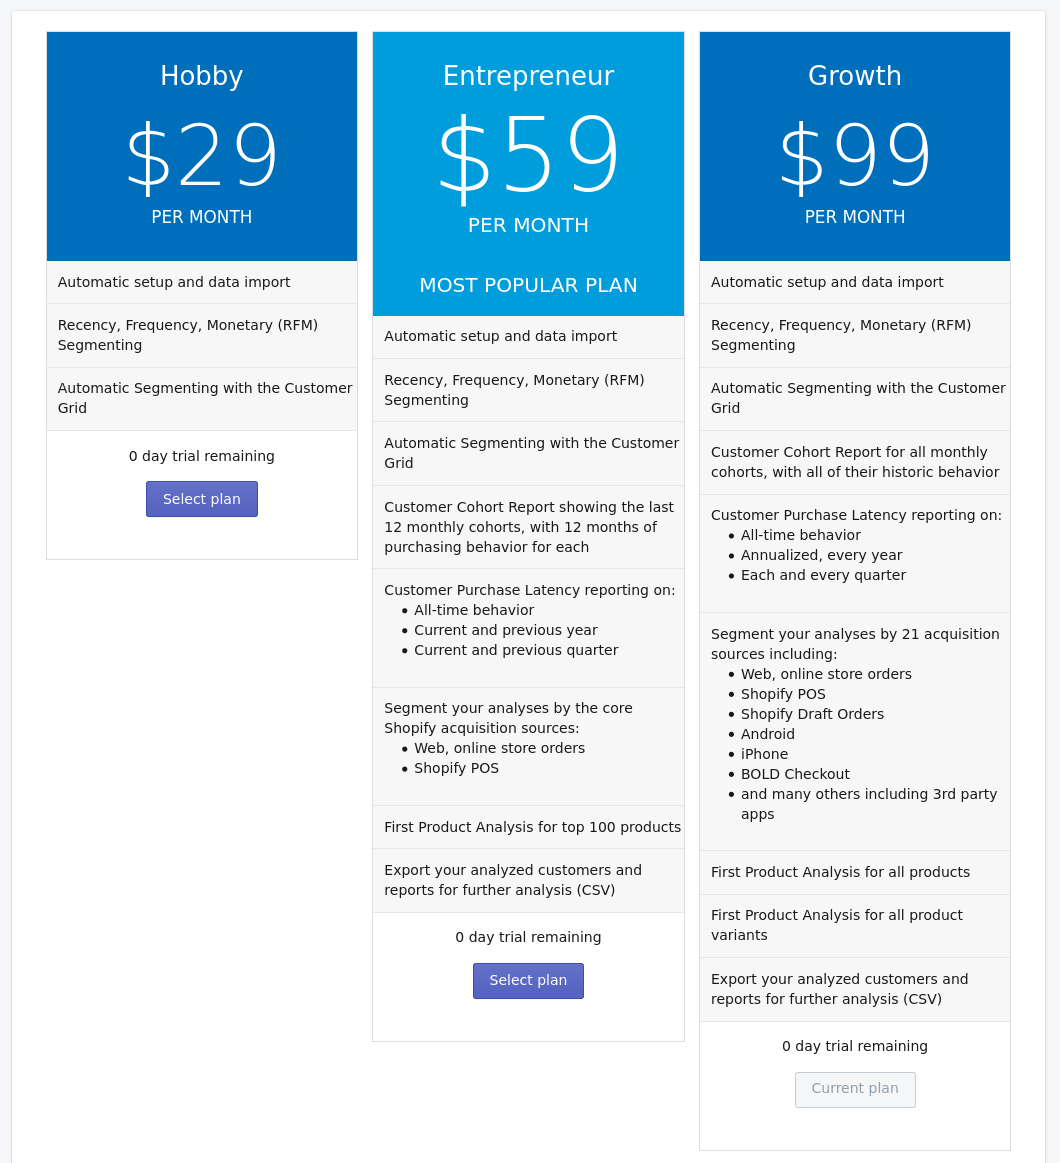 Repeat Customer Insight pricing plans